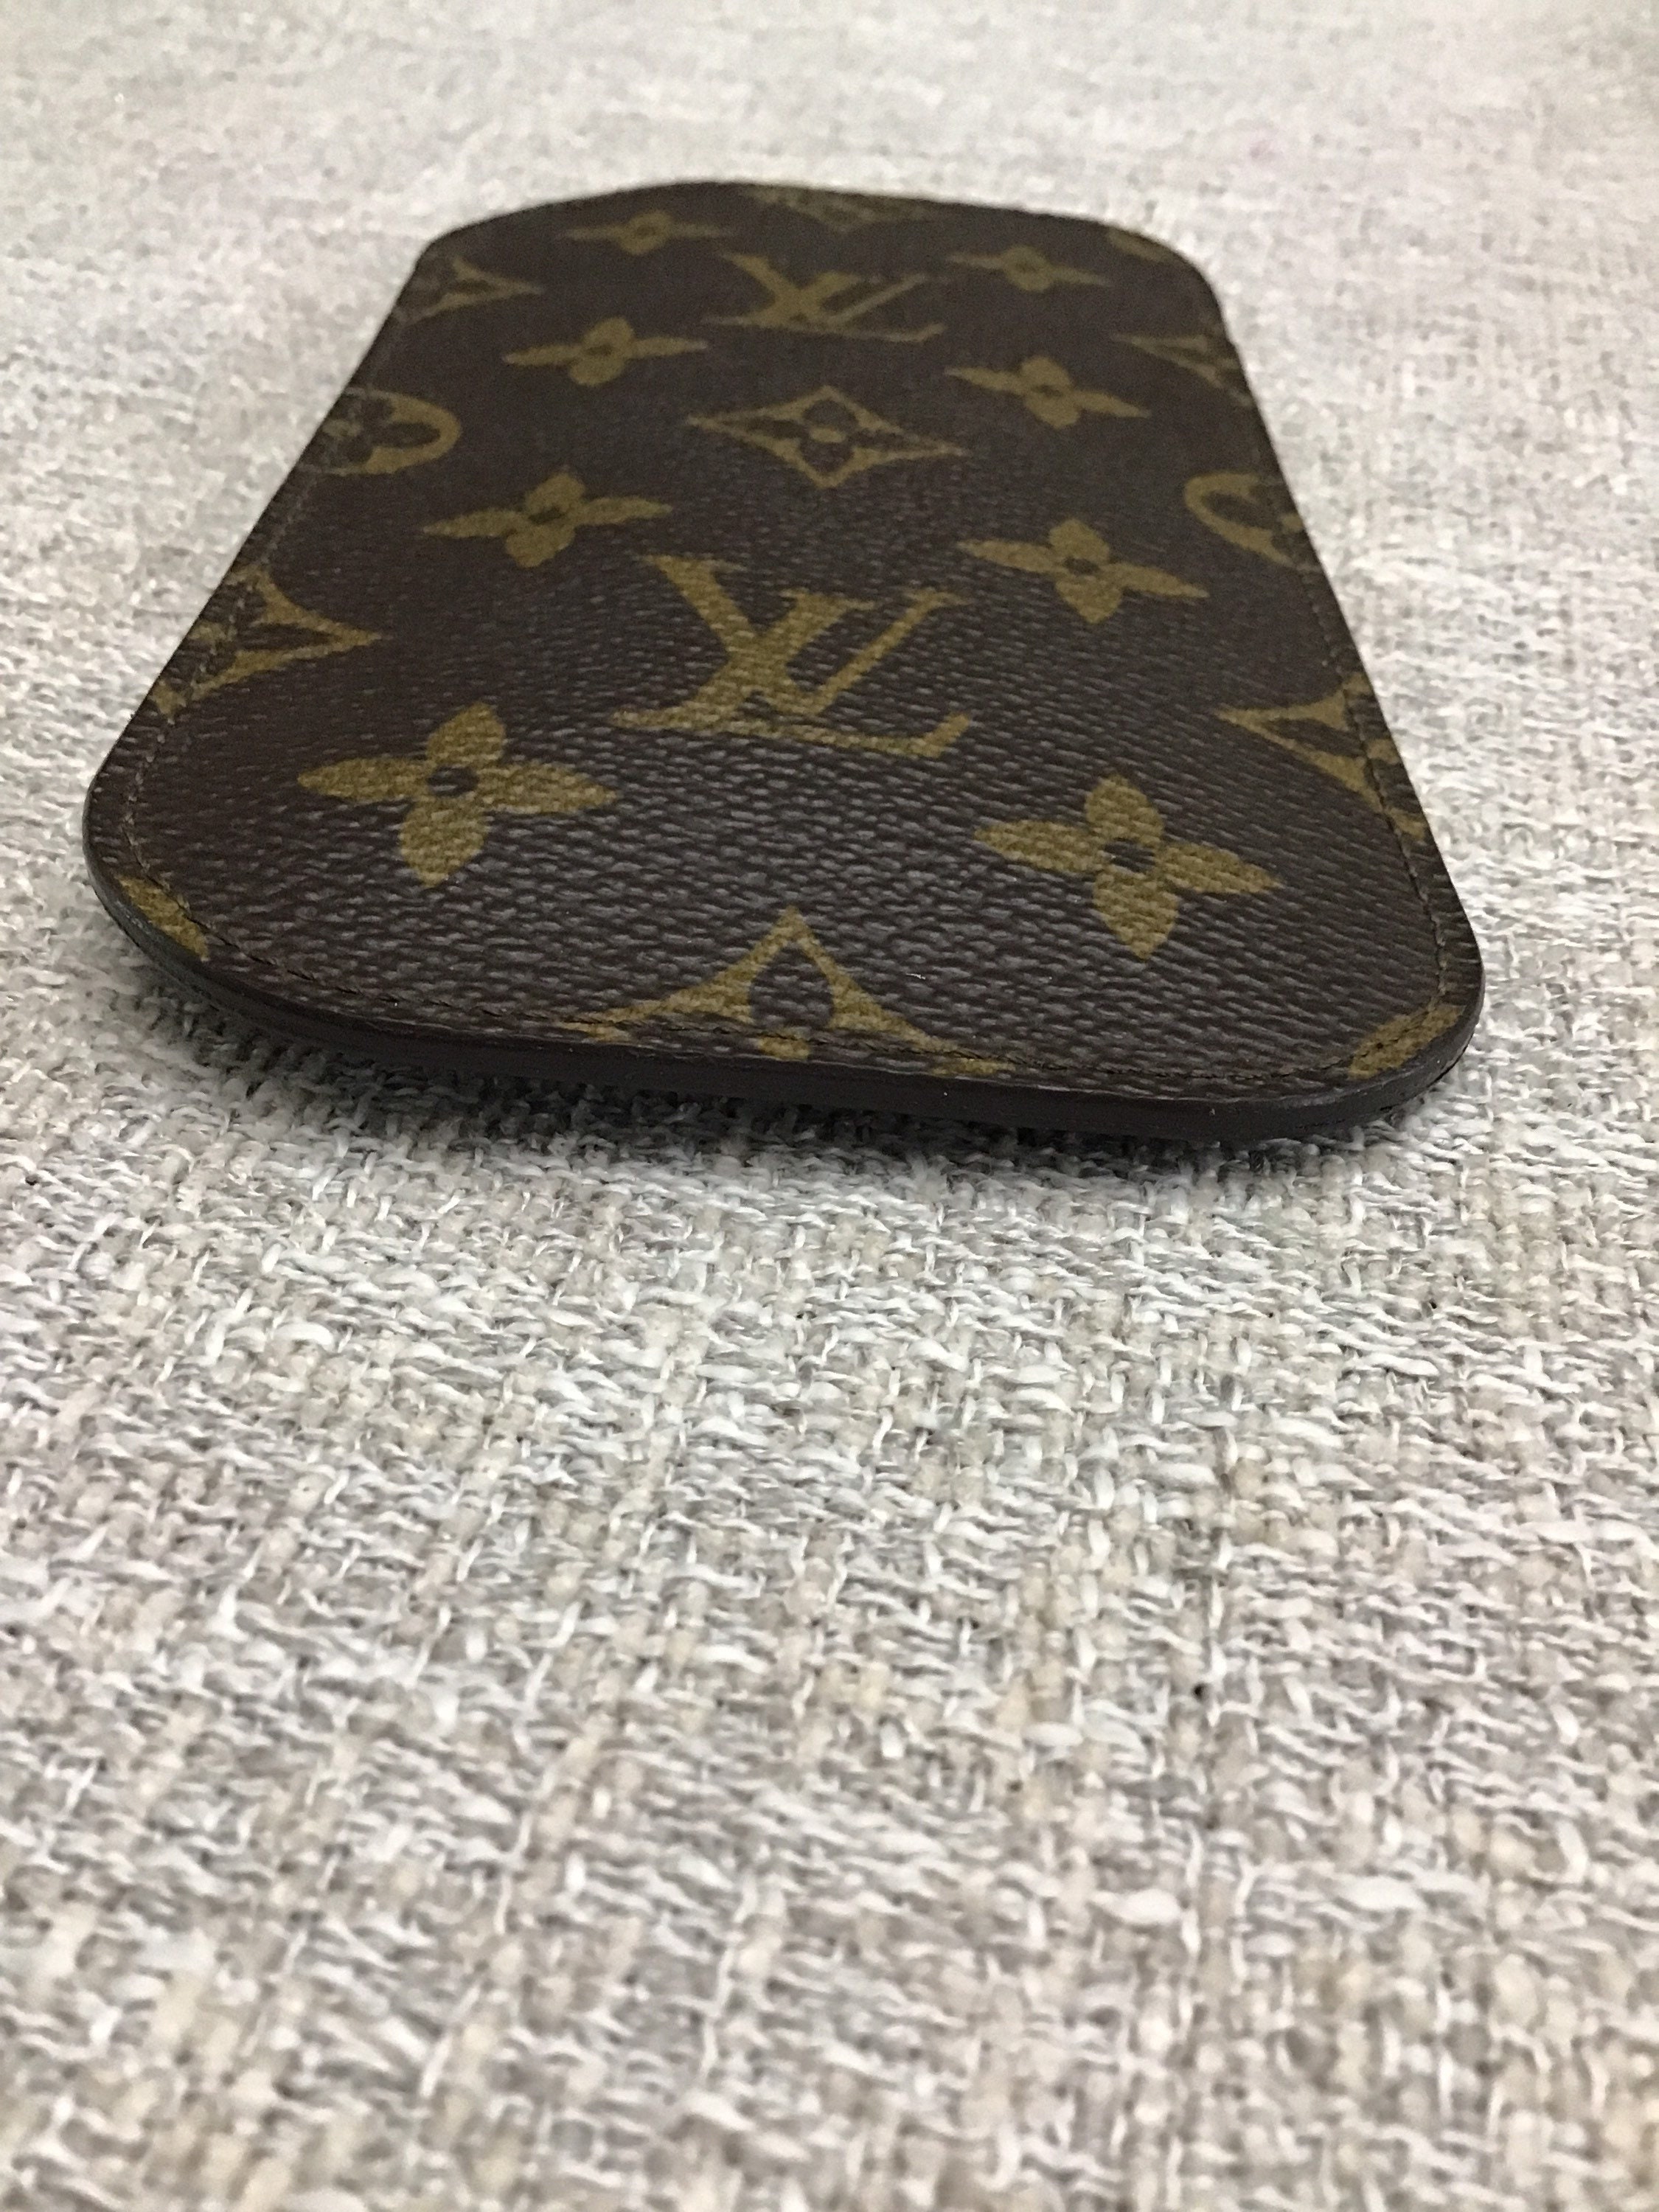 Louis Vuitton Sunglass Case with box, Men's Fashion, Watches & Accessories,  Sunglasses & Eyewear on Carousell